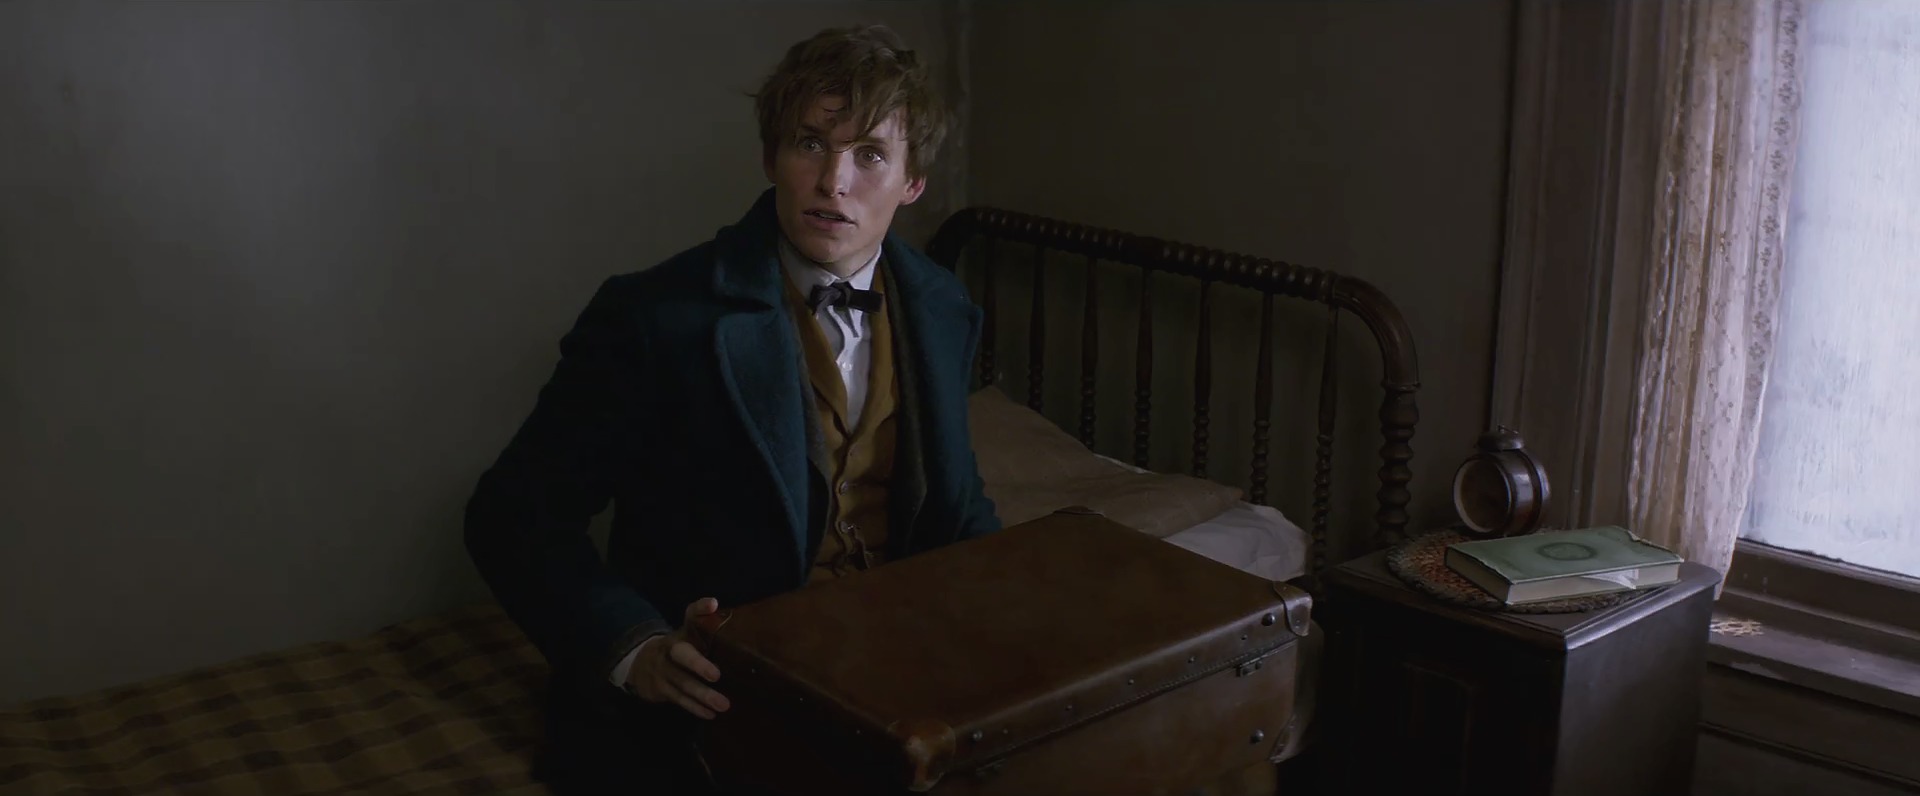 Fantastic Beasts And Where To Find Them Film Watch Online 2016 Bluray